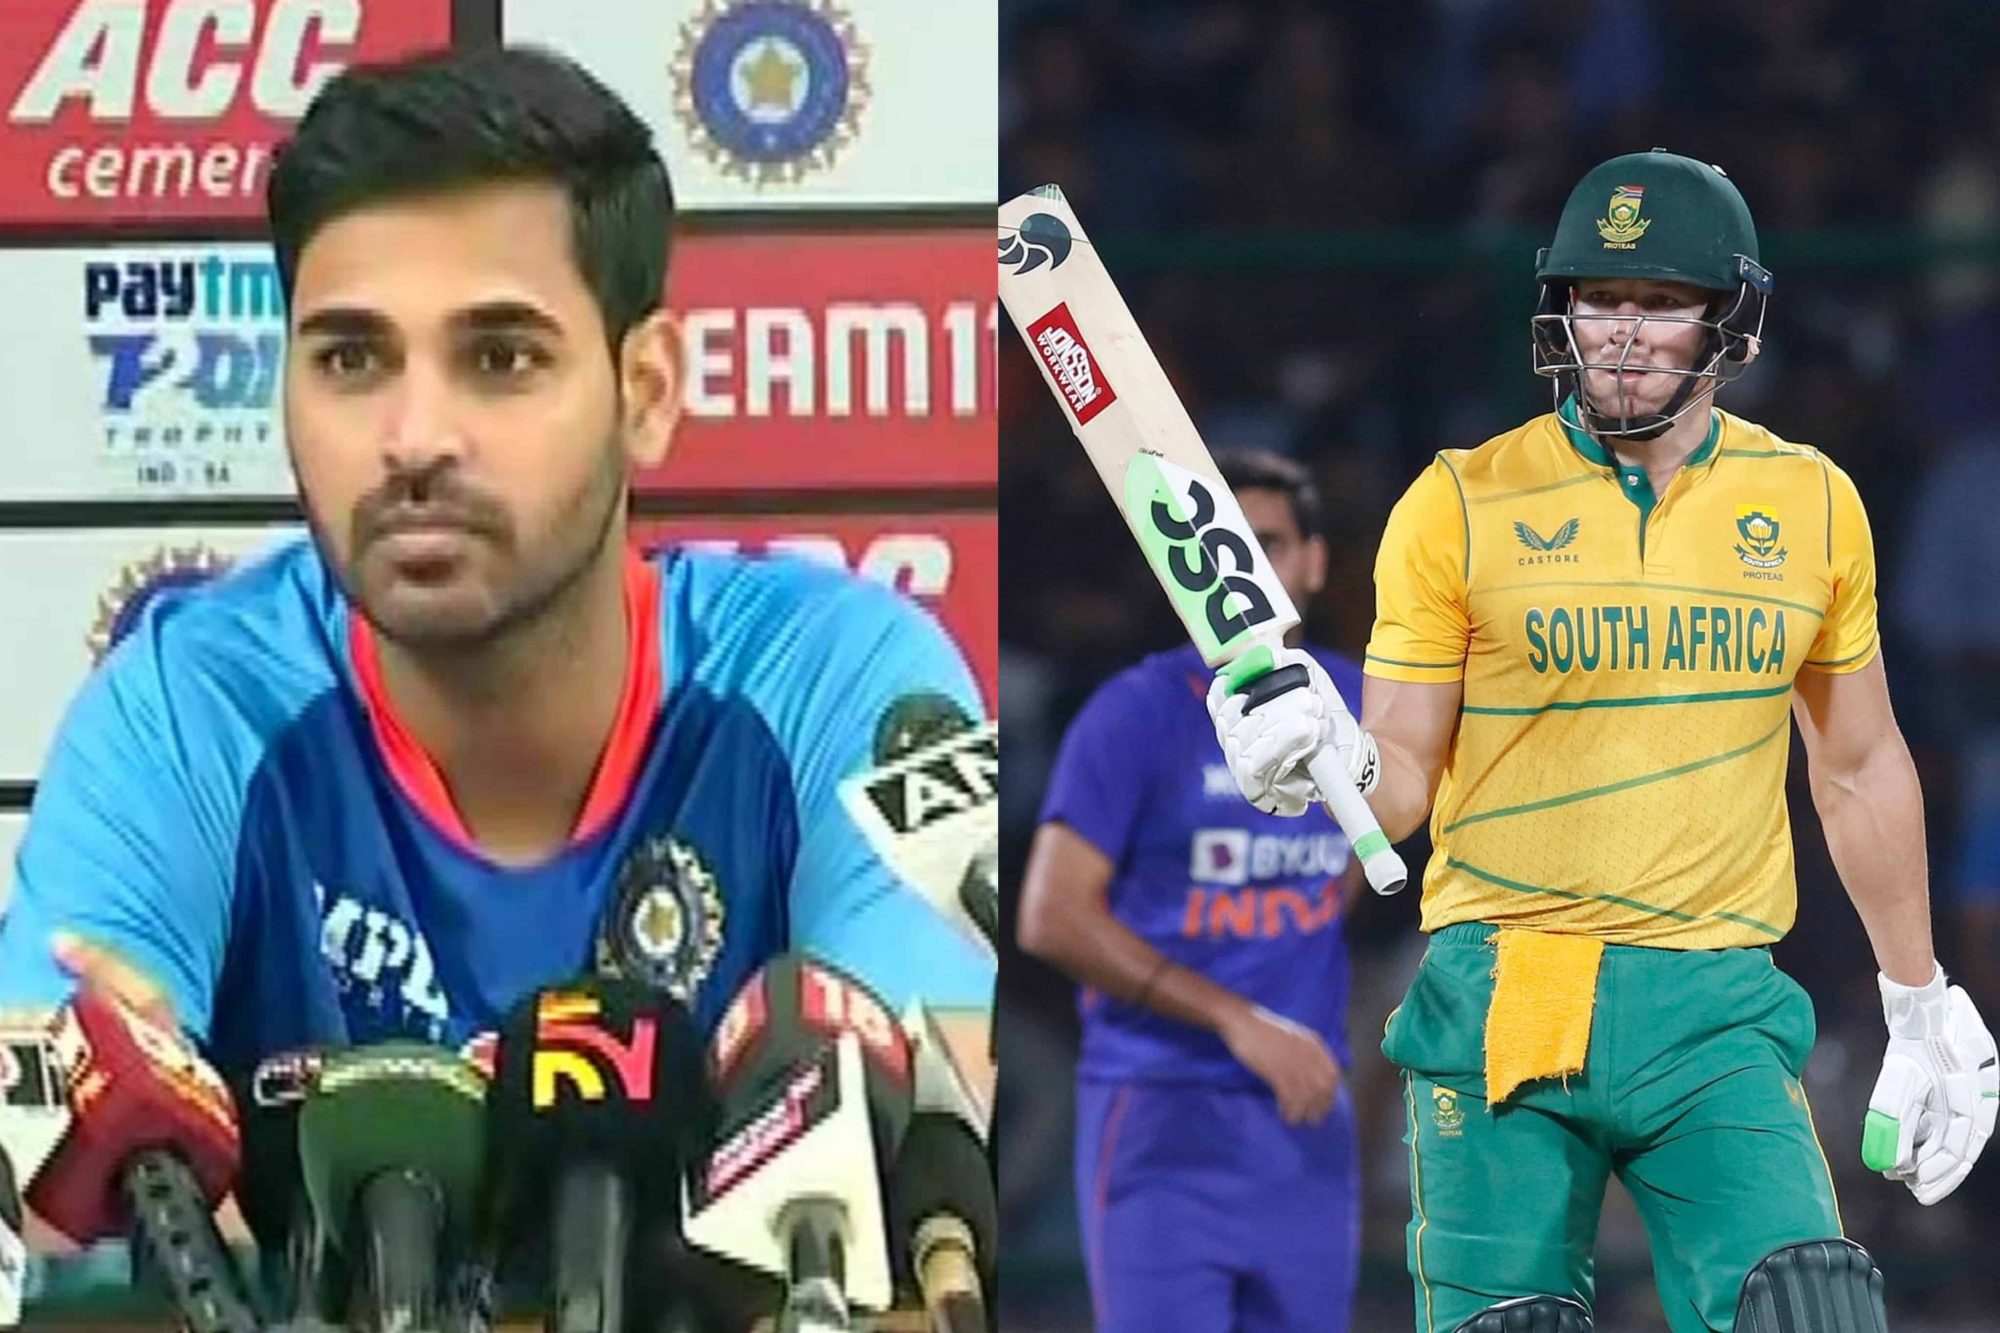 "I would want South Africa to drop him" – Bhuvneshwar Kumar’s Hilarious Remark on David Miller